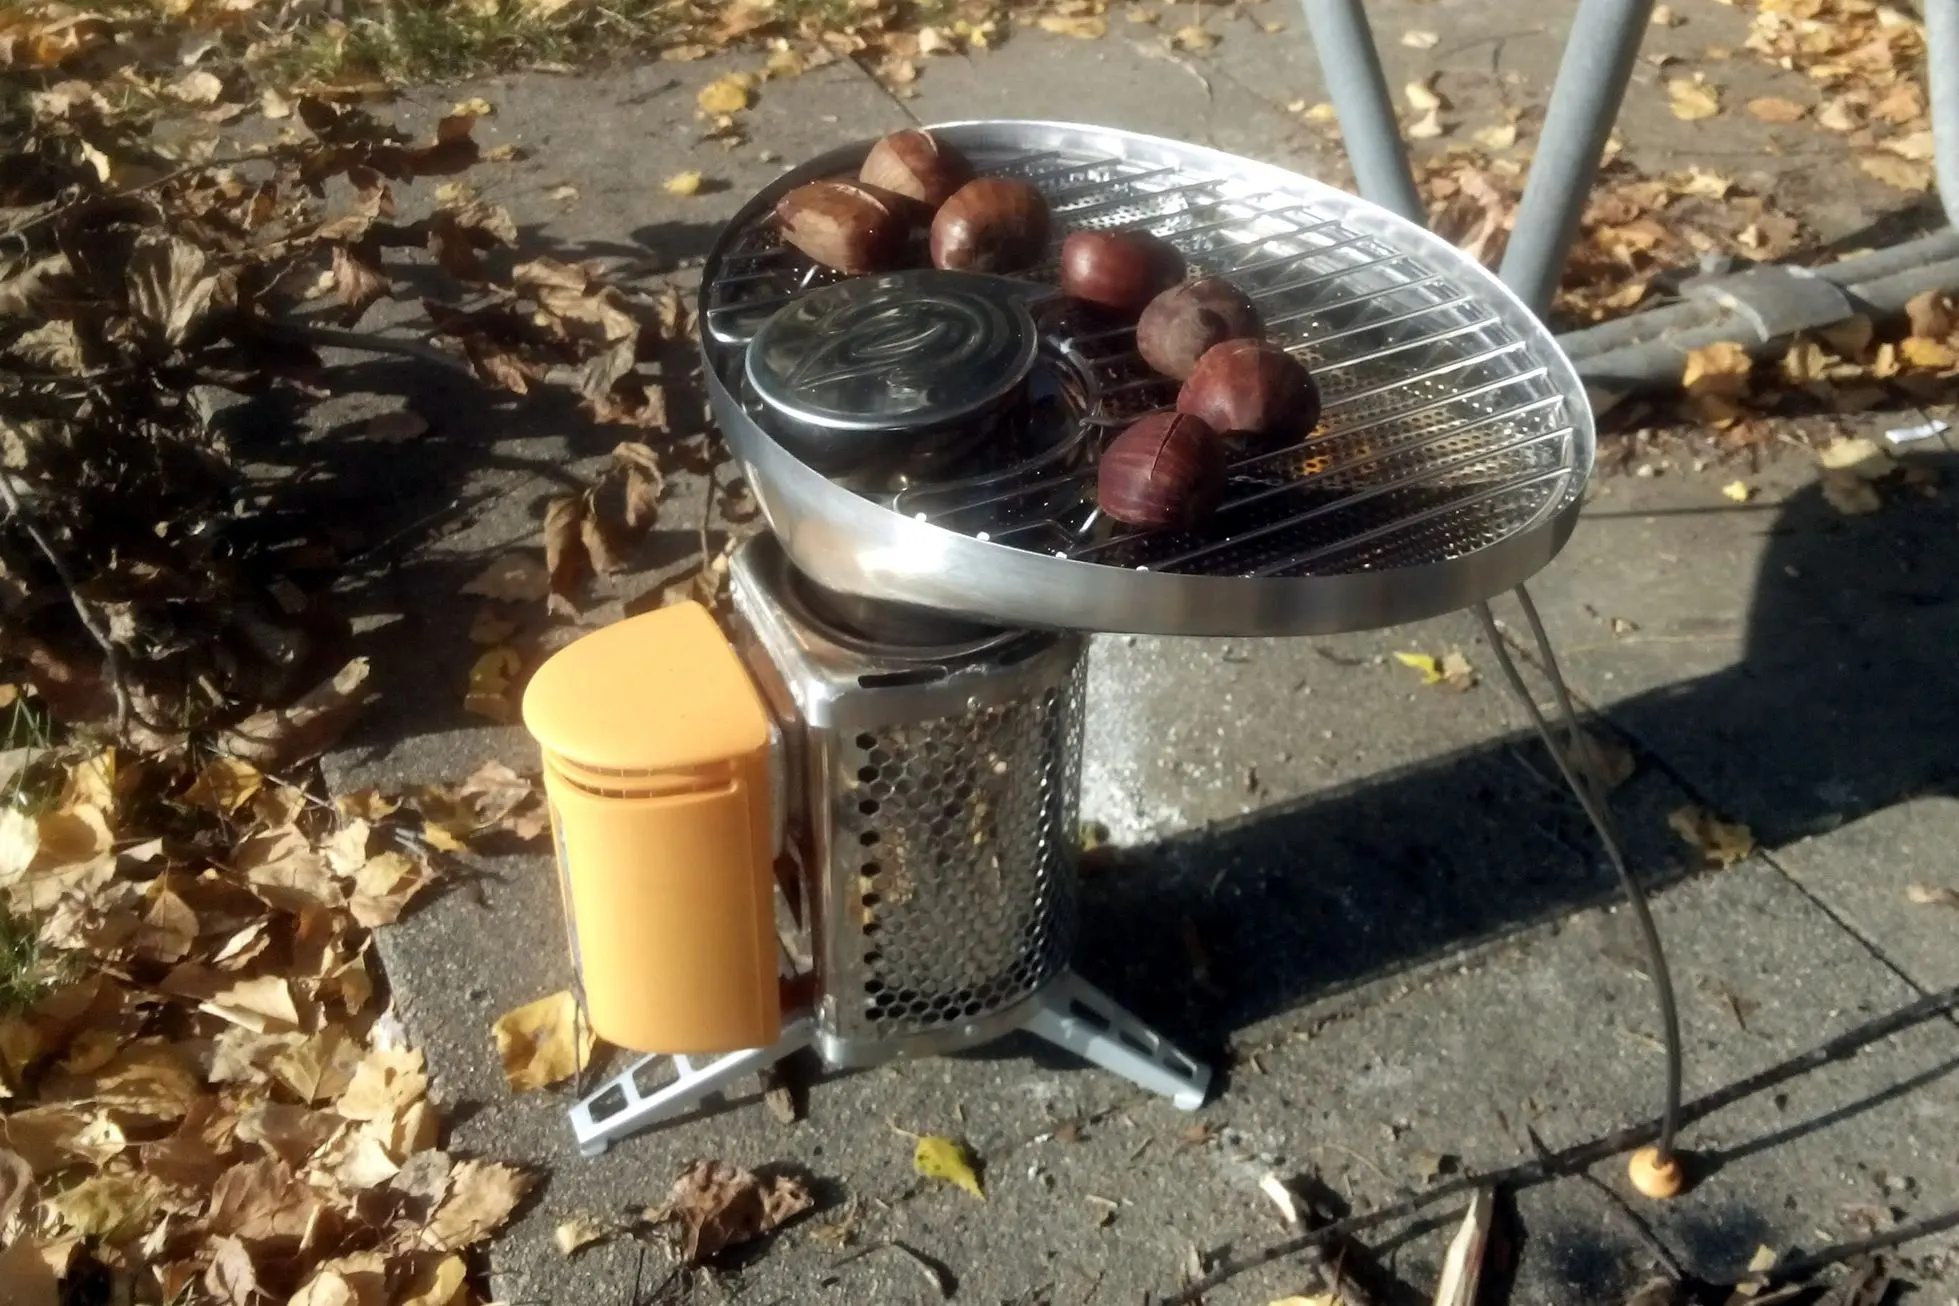 Grilling chestnuts